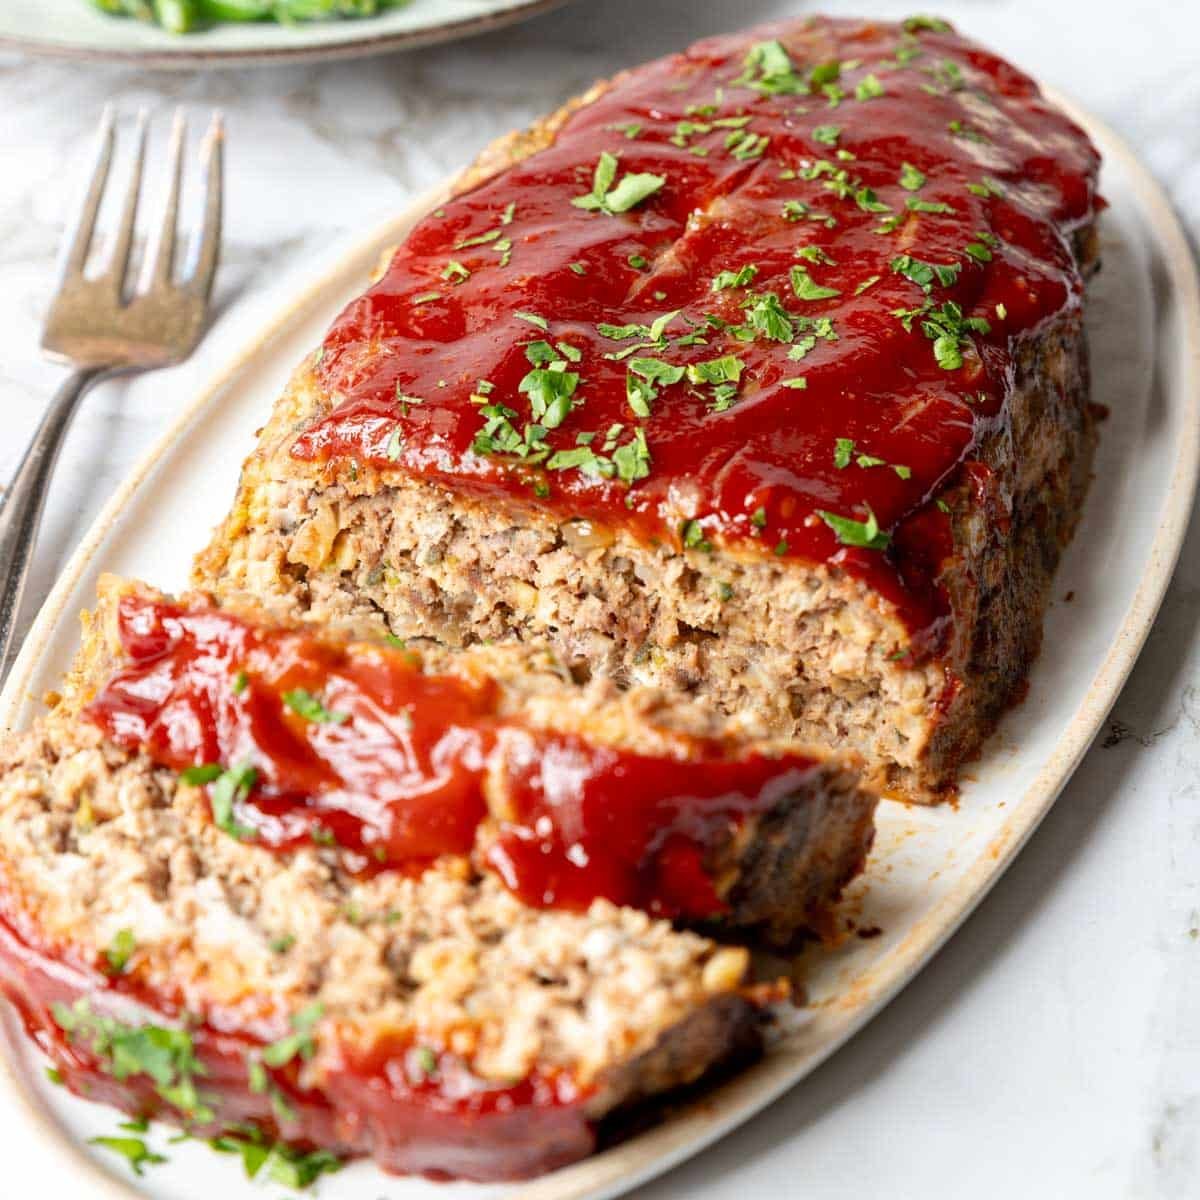 meatloaf with a ketchup topping, on a platter with two slices cut